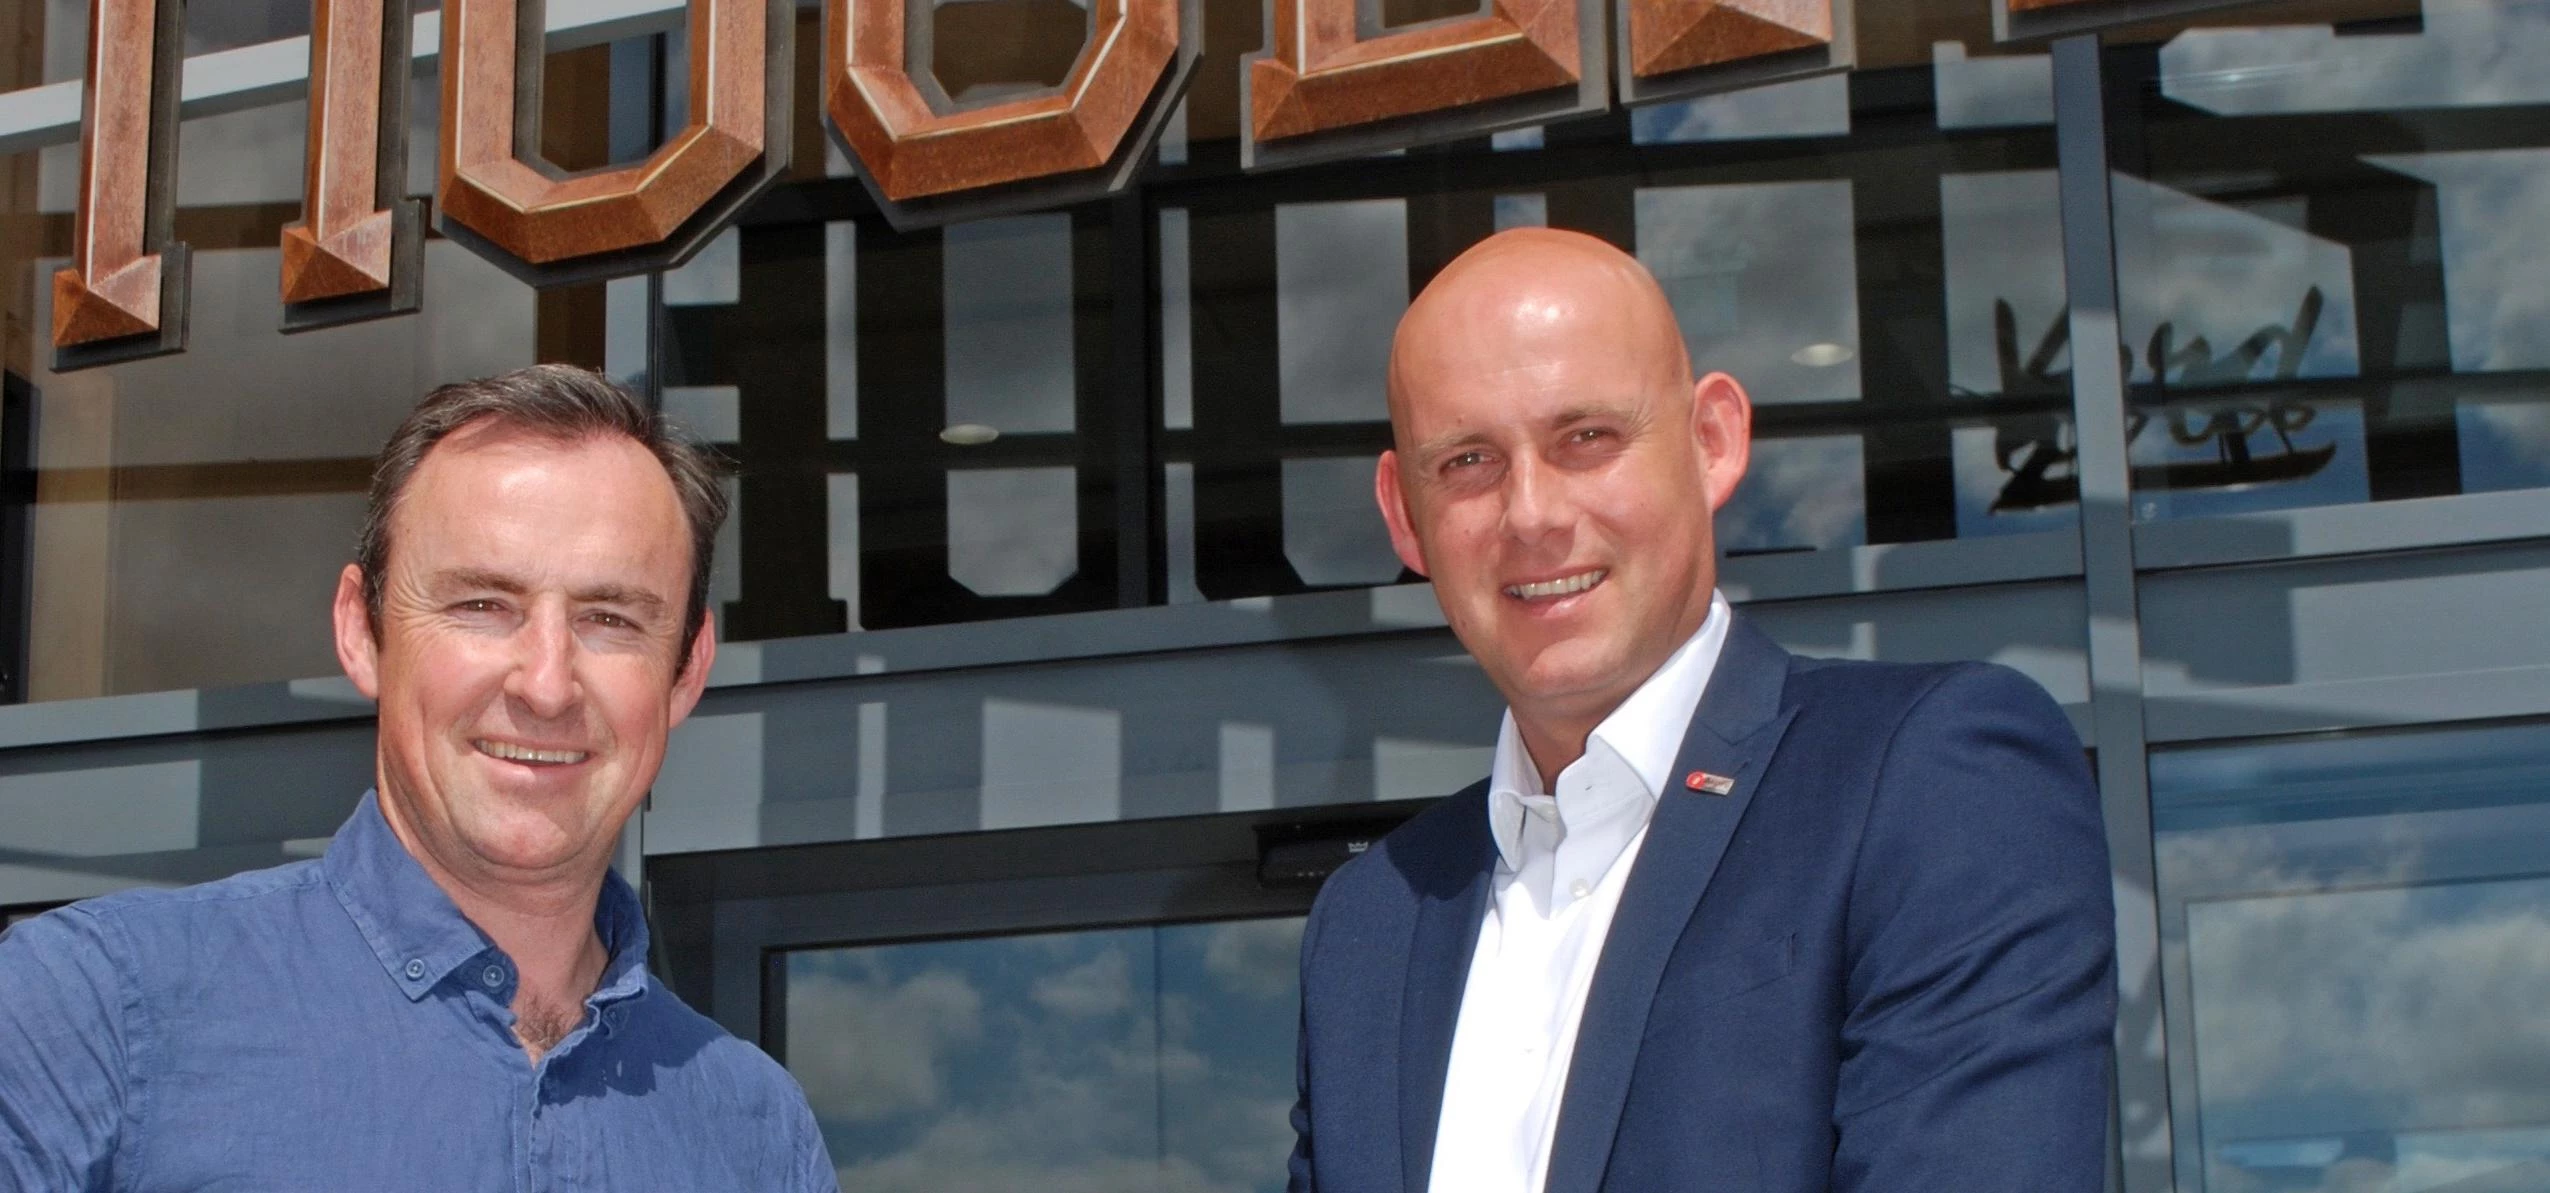 KEY ROLE IN EXPANSION … Charlie Hoult (left) and Justin Godfrey, of Aspire